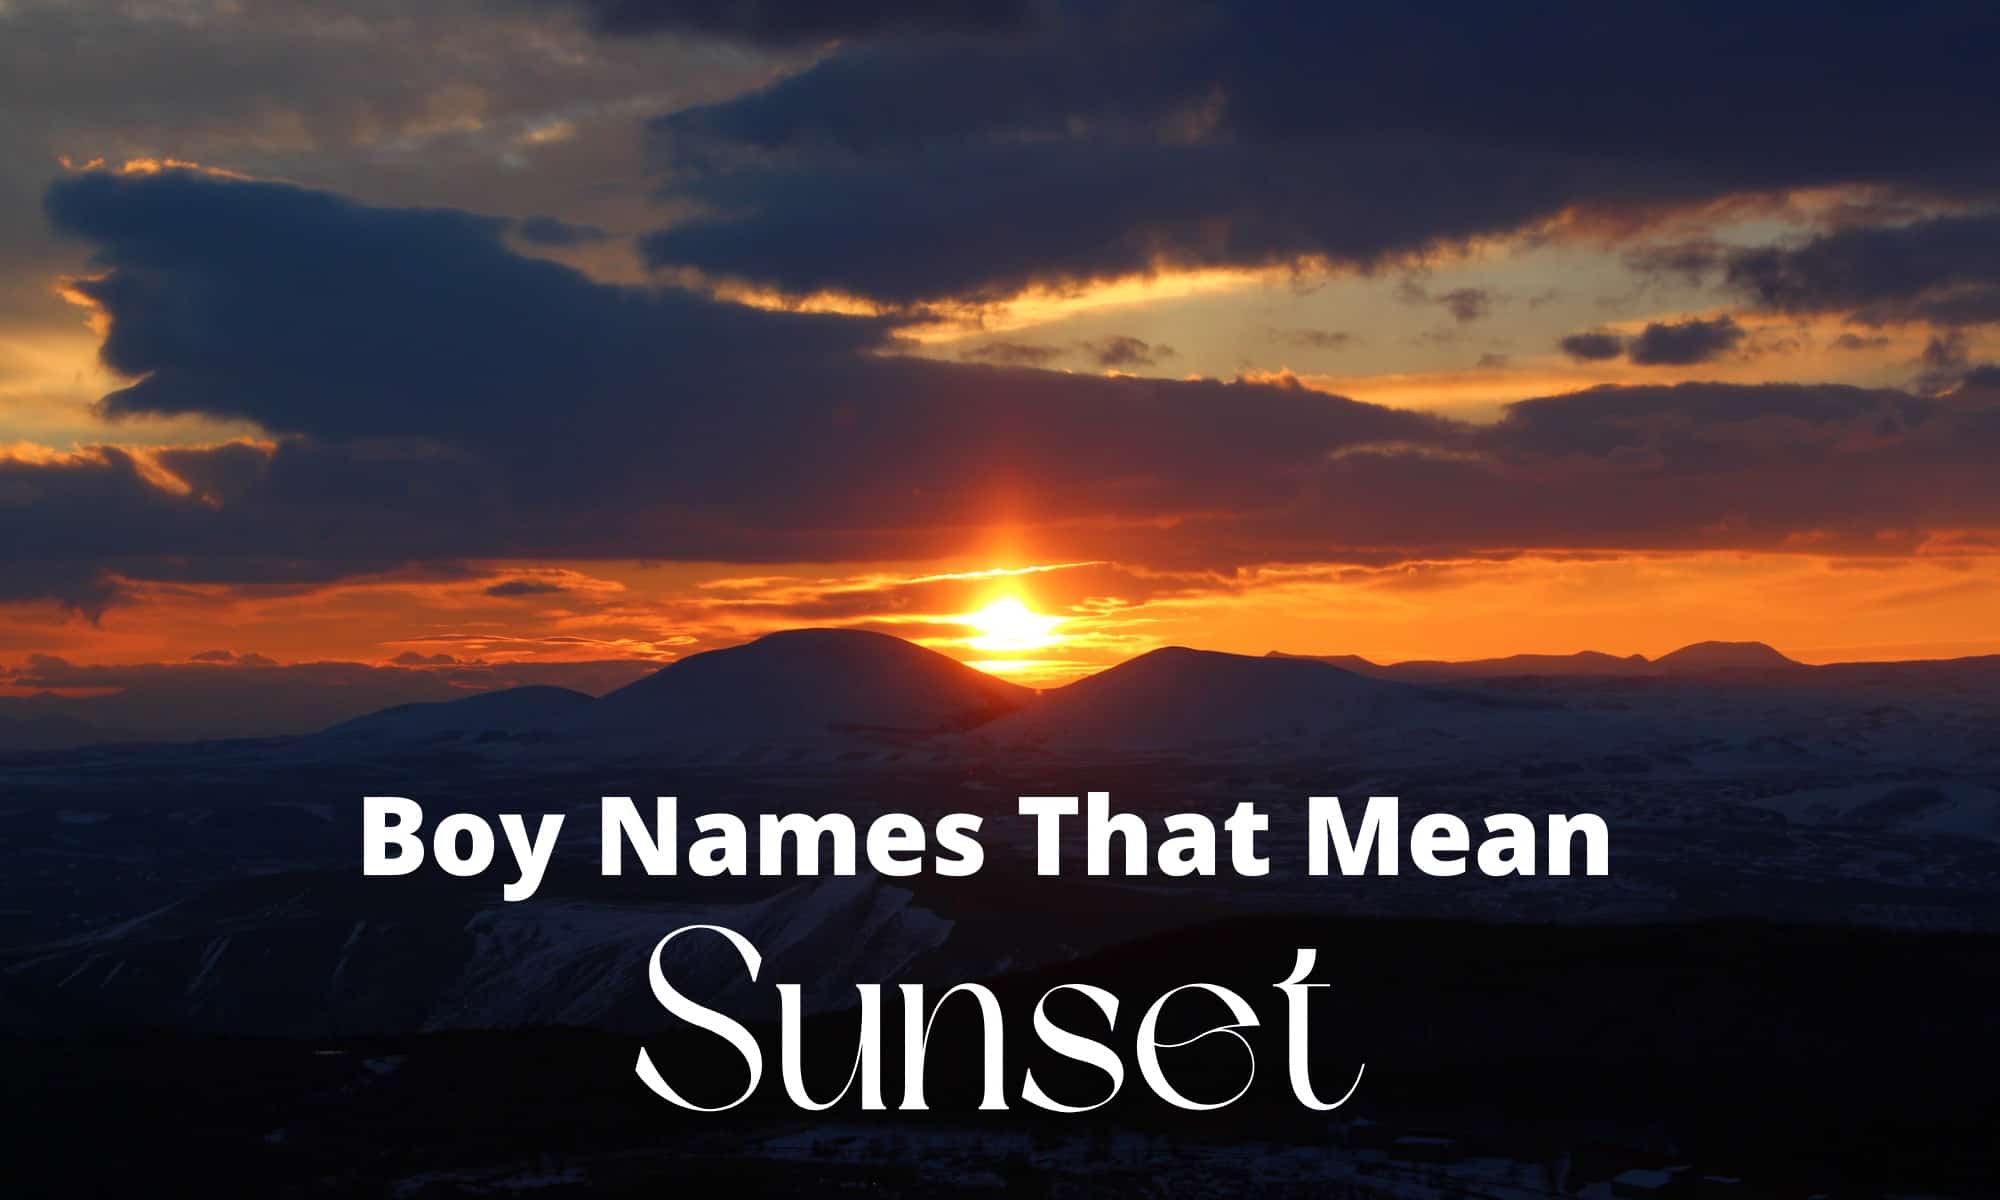 Boy Names That Mean Sunset